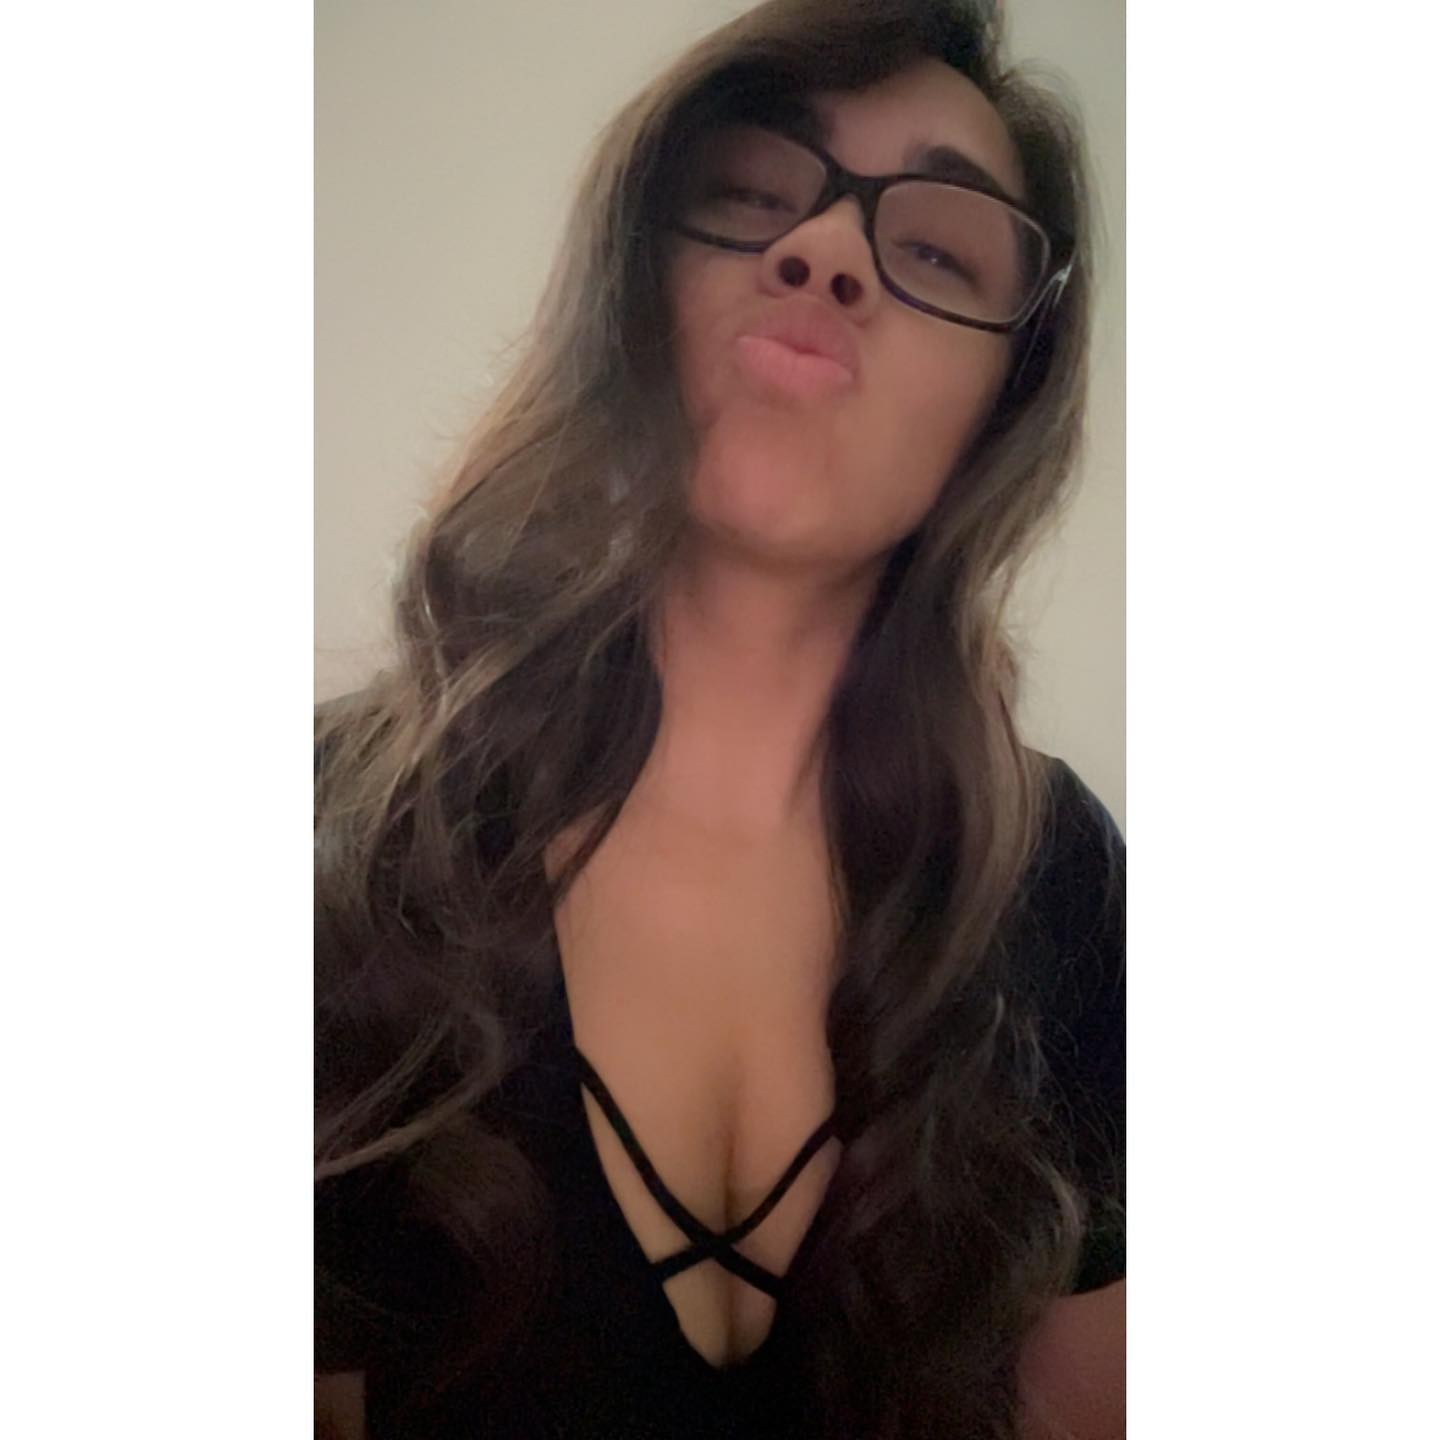 “Love yourself baby or nobody will!” 😘❤️‍🔥
.
.
#onlyfans #ofgirl #ofmodel #latina #mixed #contentcreator #adultcontent #girlswithglasses #blindaf #curls #longhairdontcare #girlswithtattoos #htx #tx #babe #milf #explorepage #explore #shortgirls #justatinytaste #selflove